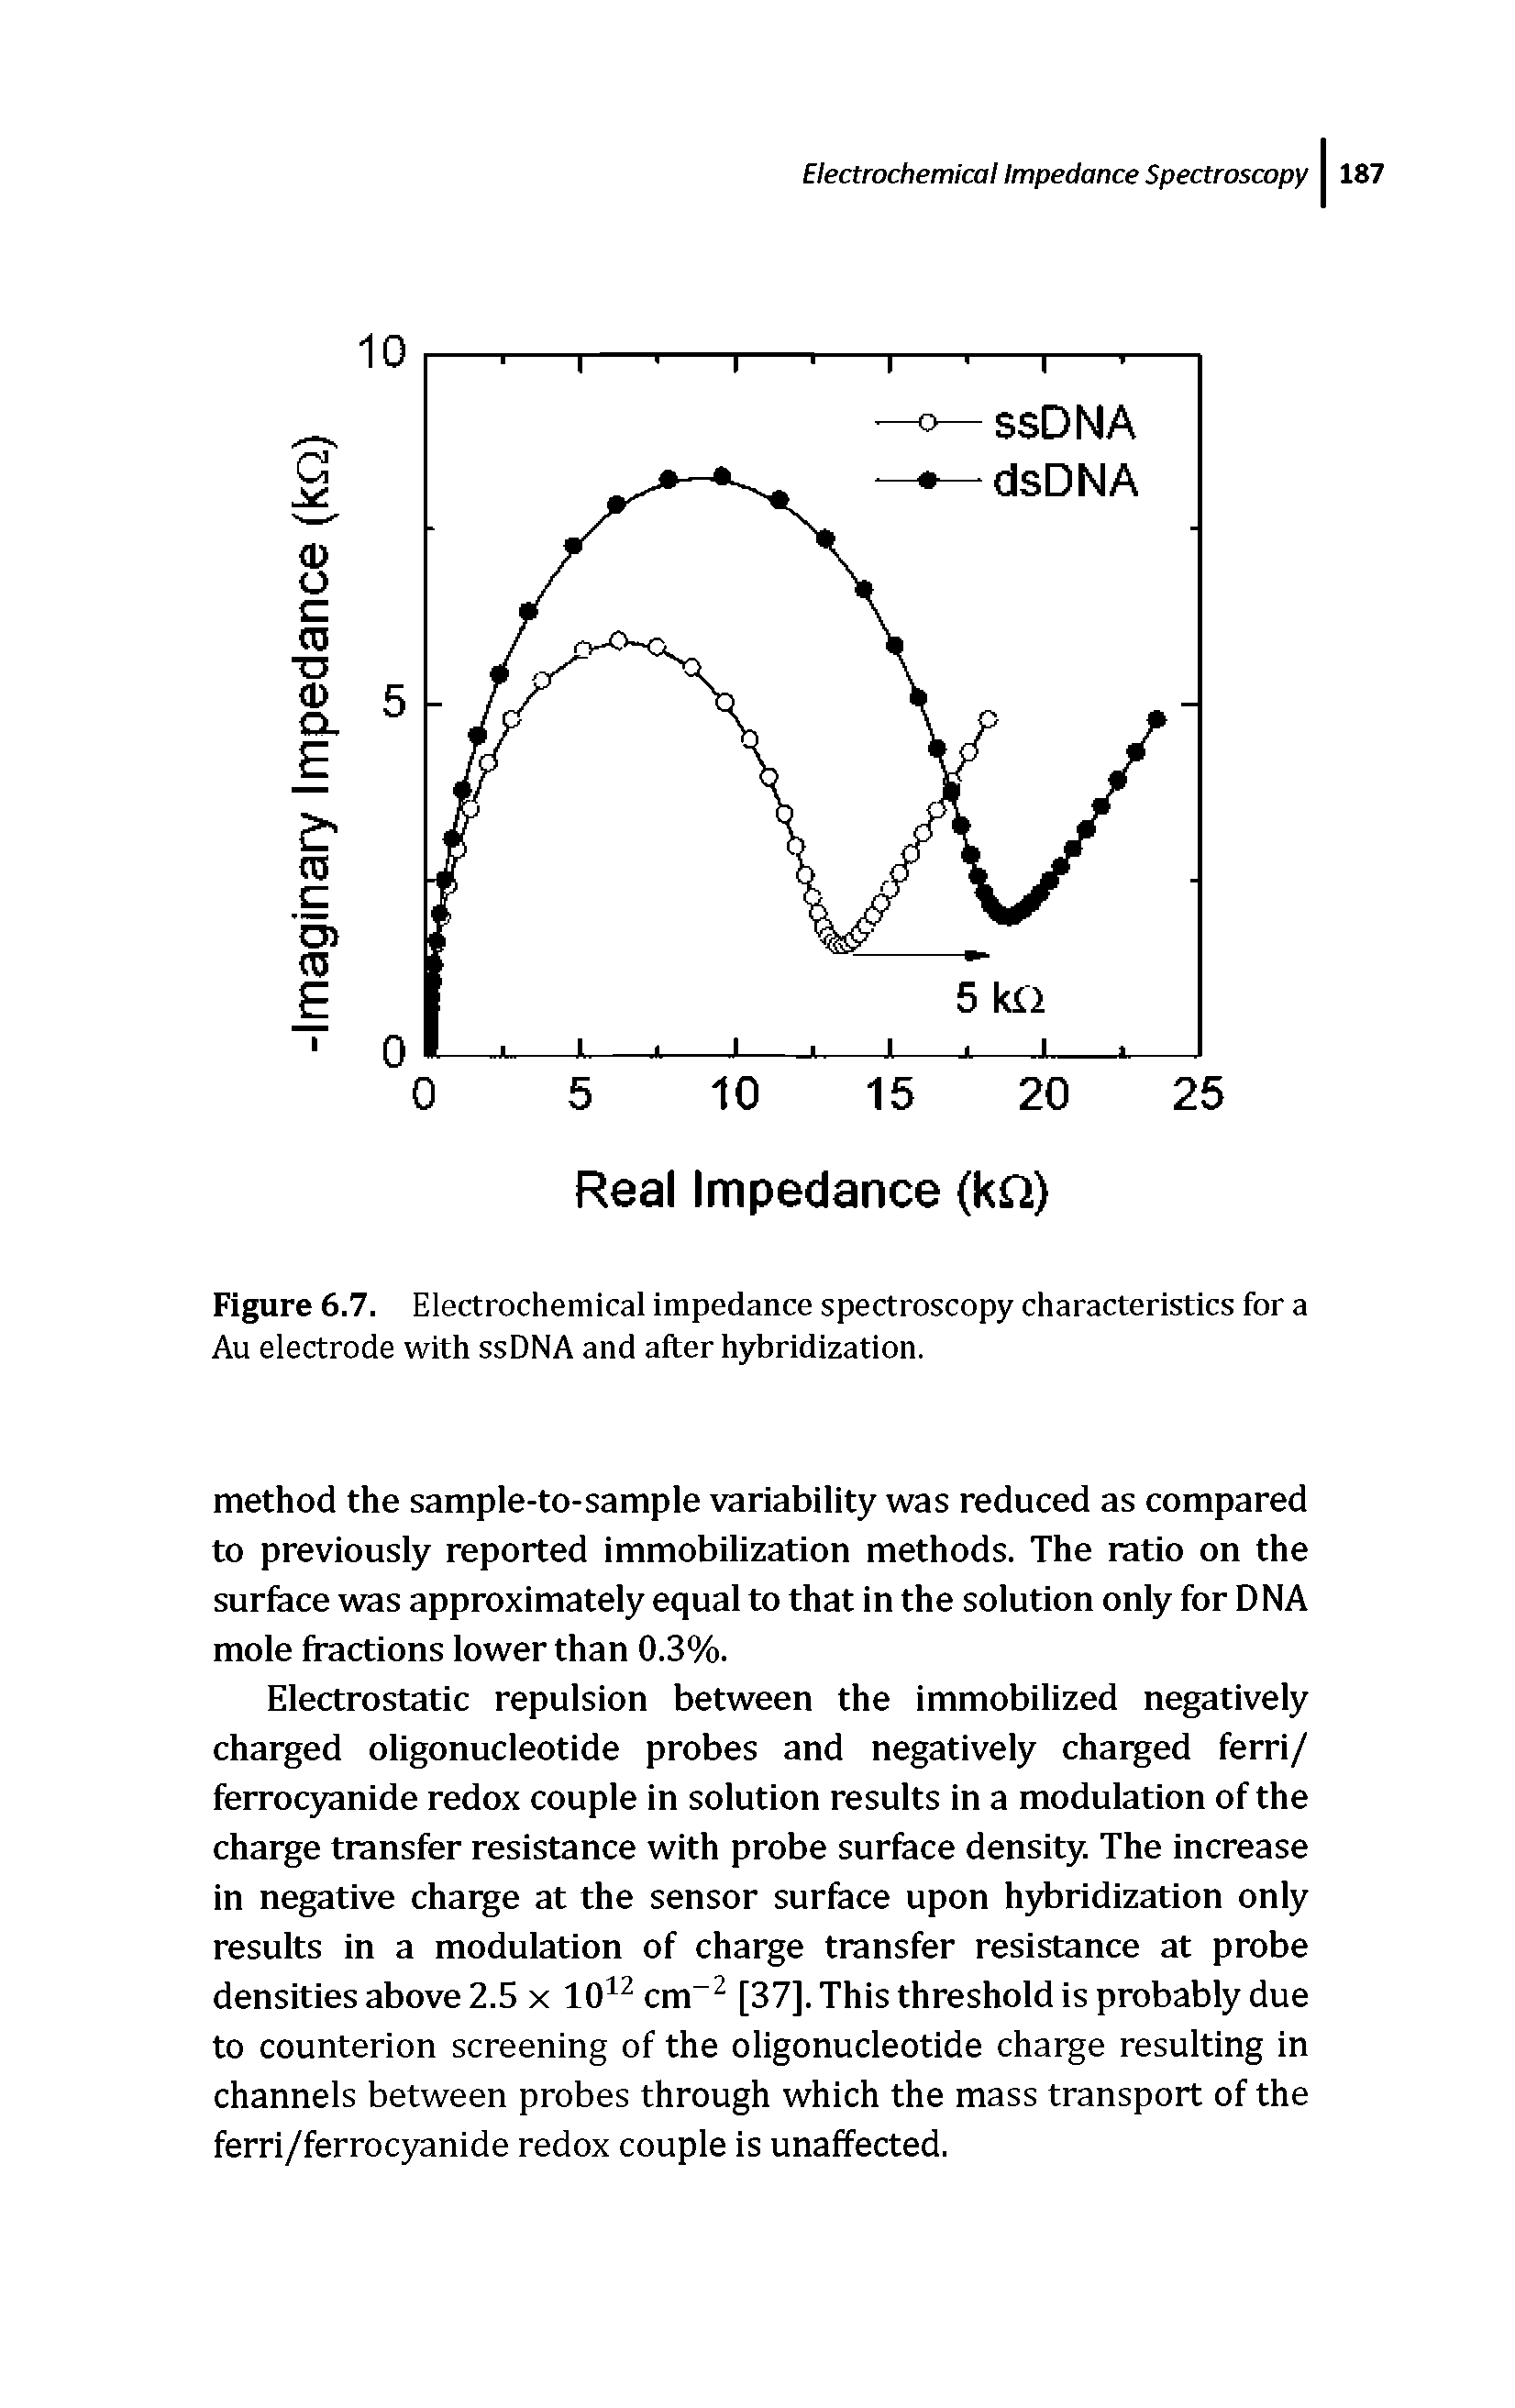 Figure 6.7. Electrochemical impedance spectroscopy characteristics for a Au electrode with ssDNA and after hybridization.